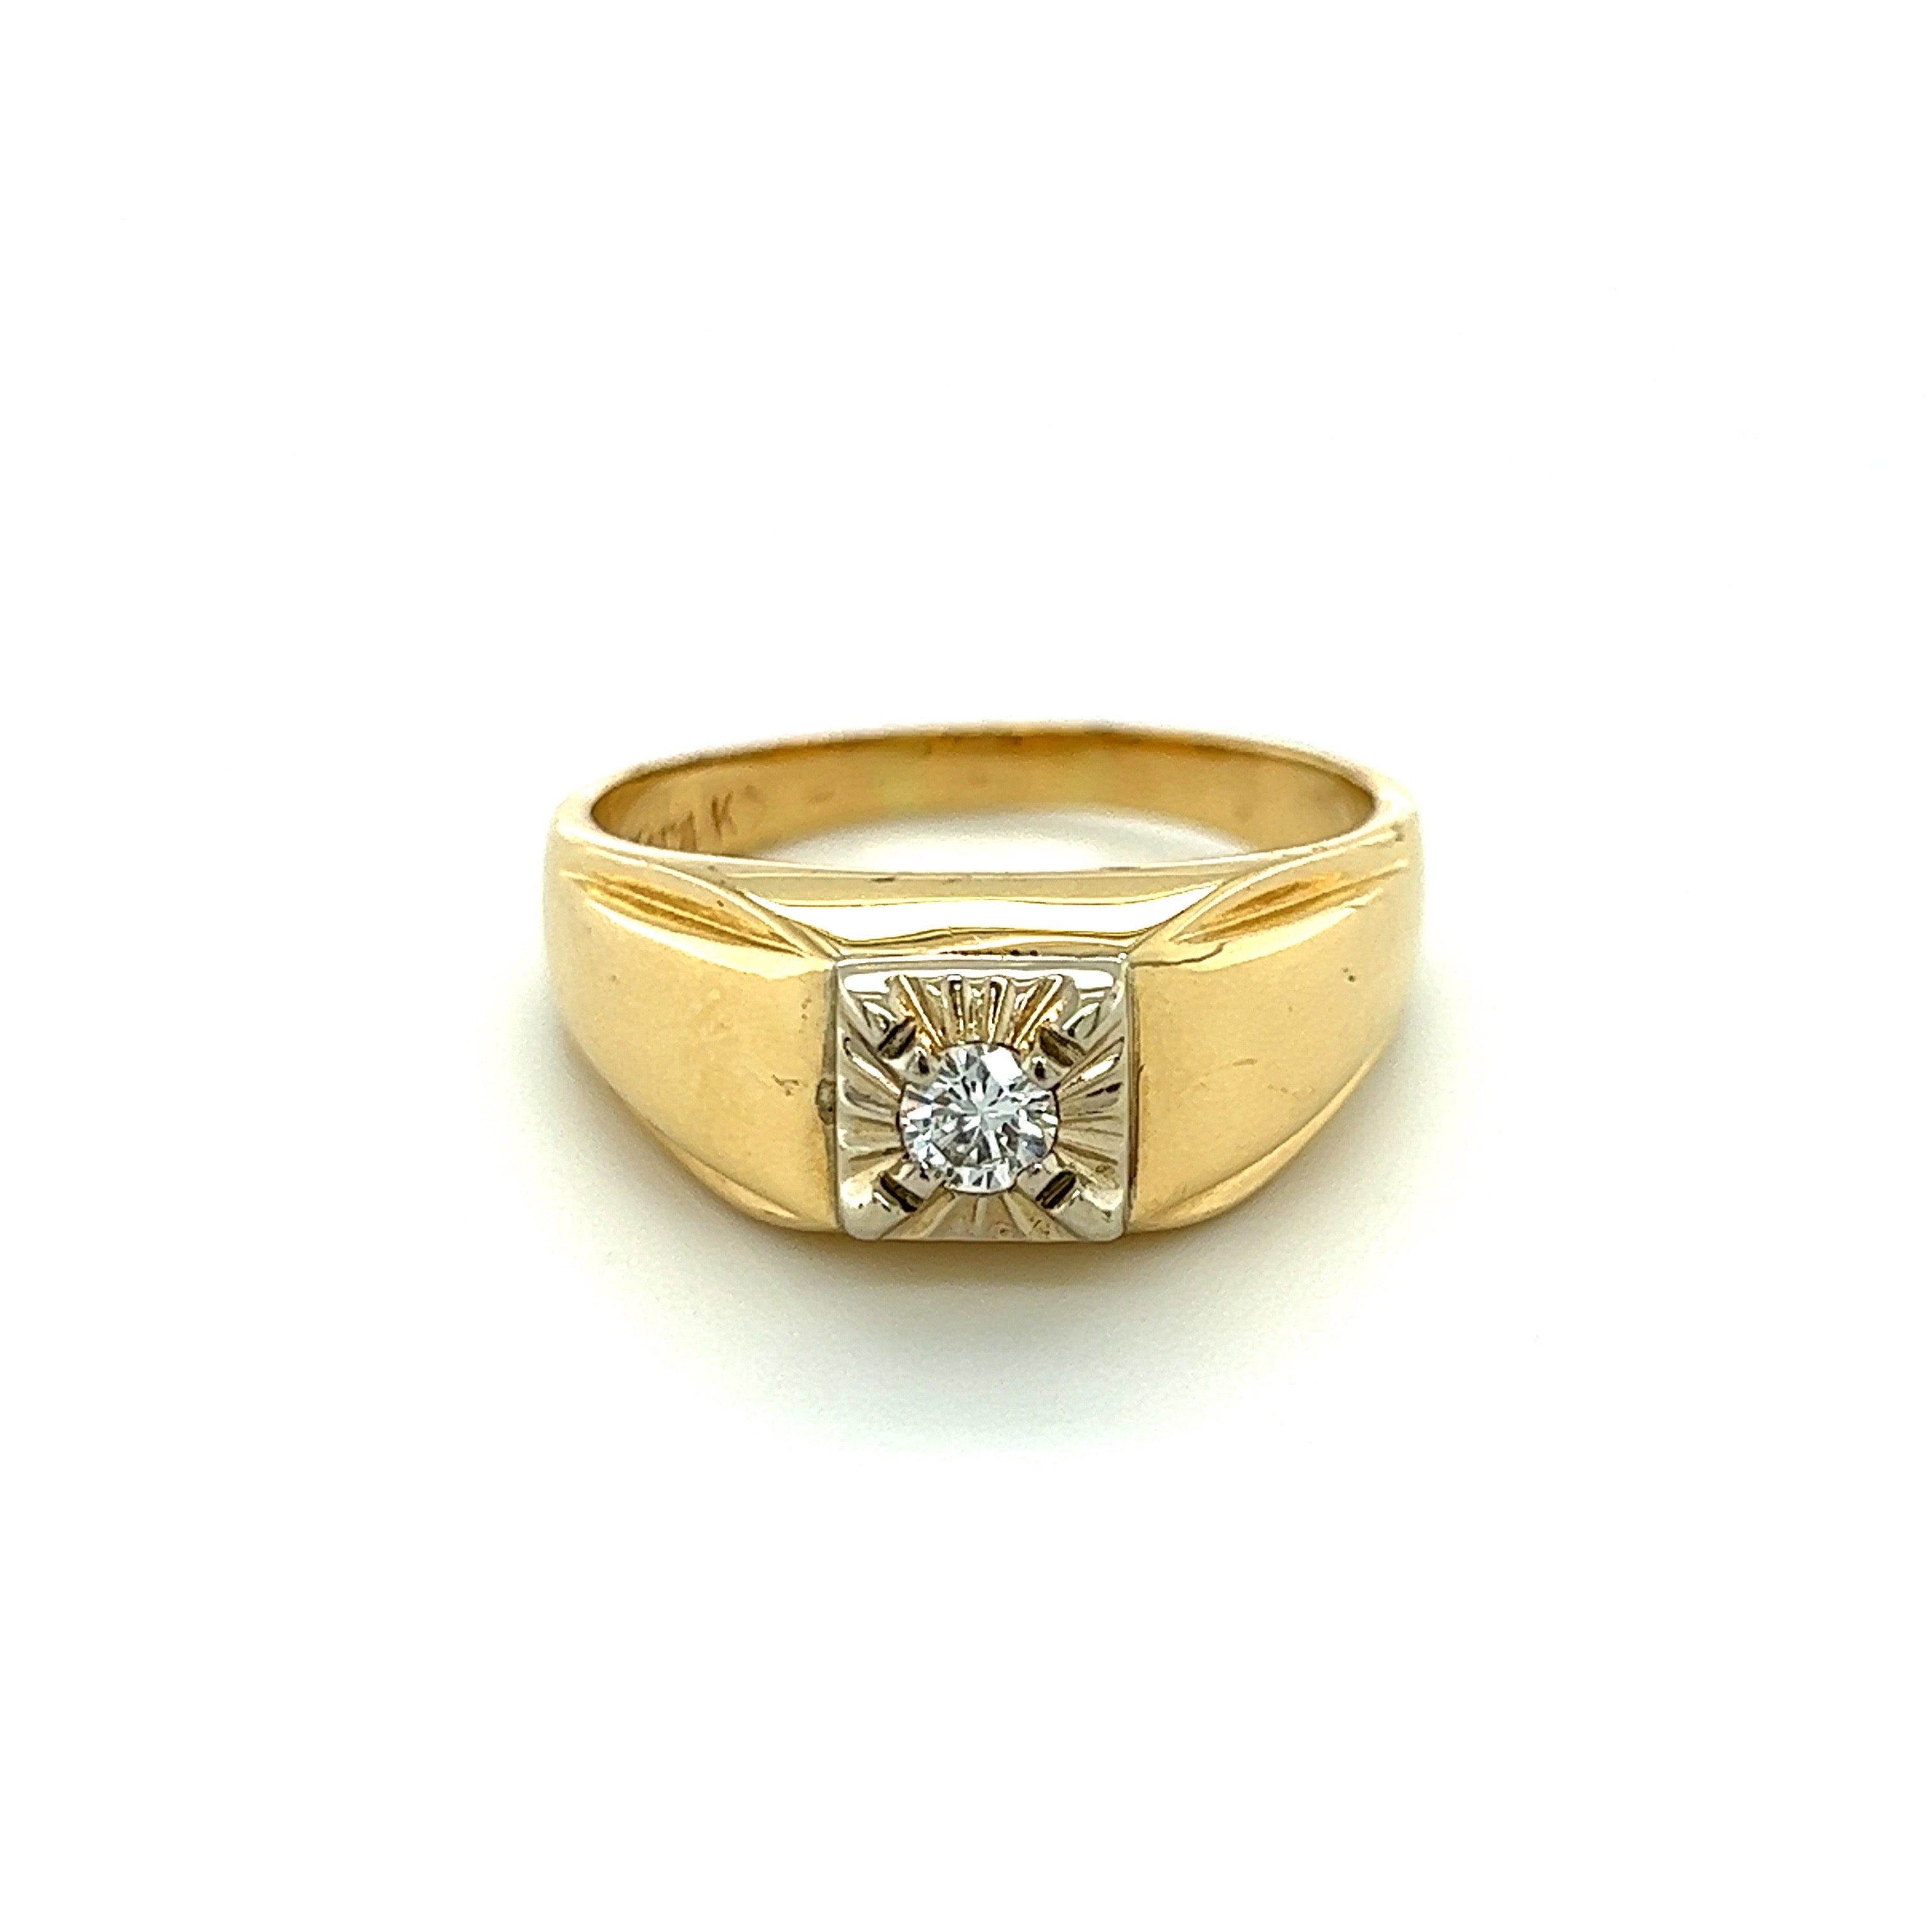 Buy Mens Diamond Ring 14K Two-Tone Gold .42 ctw Kentucky Cluster Online |  Arnold Jewelers